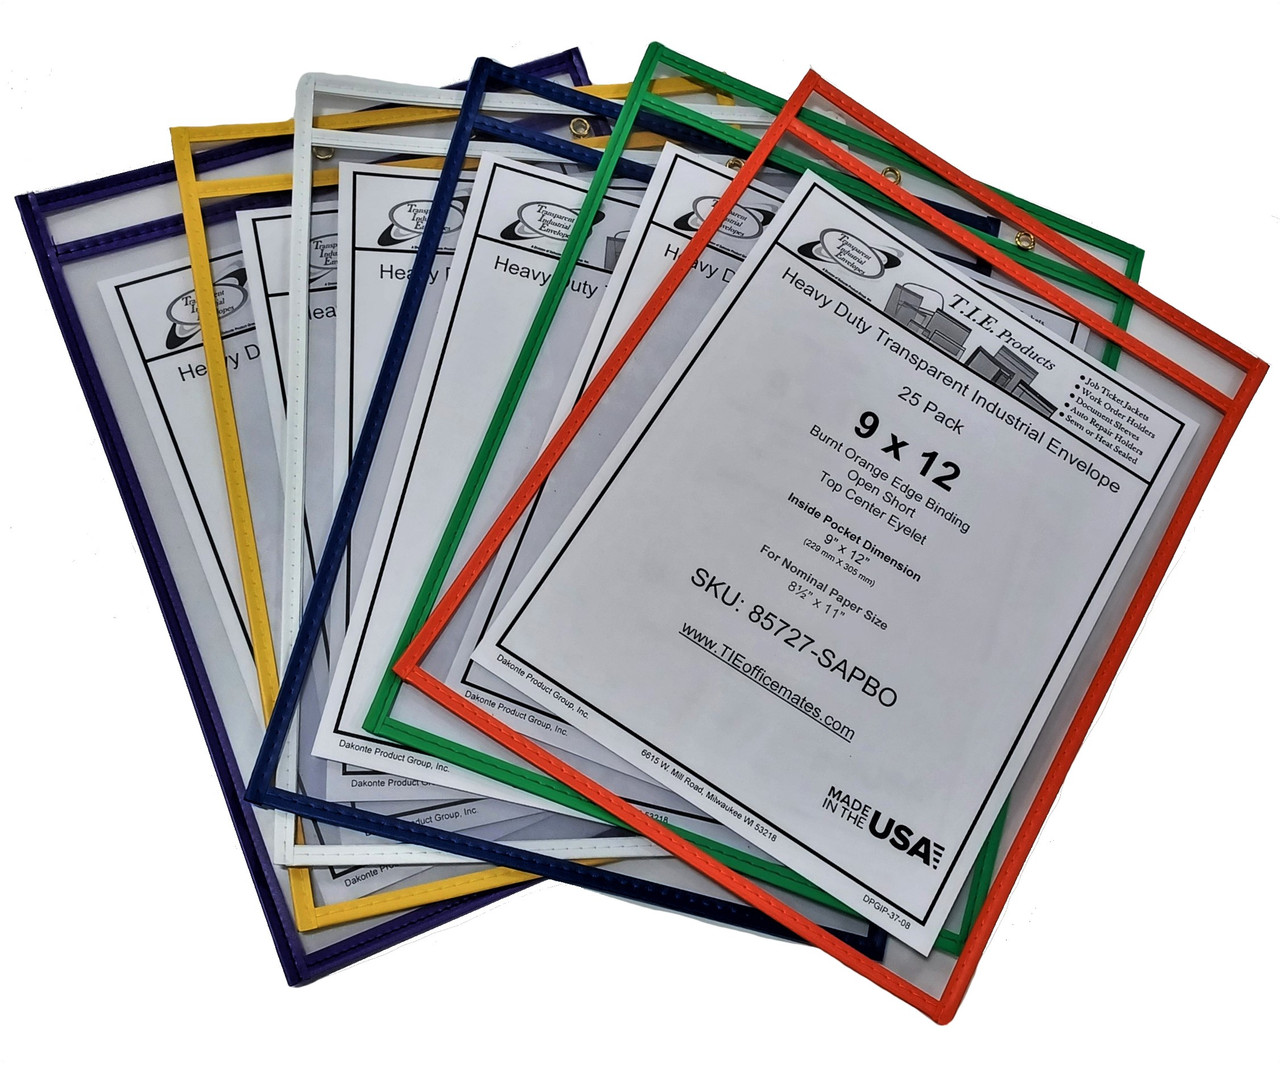  Job Ticker Holders - Plastic Sleeves for Paper 8.5x11 - Job  Ticket Holders 9x12 - Work Order Plastic Sleeves - Shop Ticket Holders (6  Pack) Clear Paper Sleeves Protector - 8.5 x 11 Tickets : Office Products